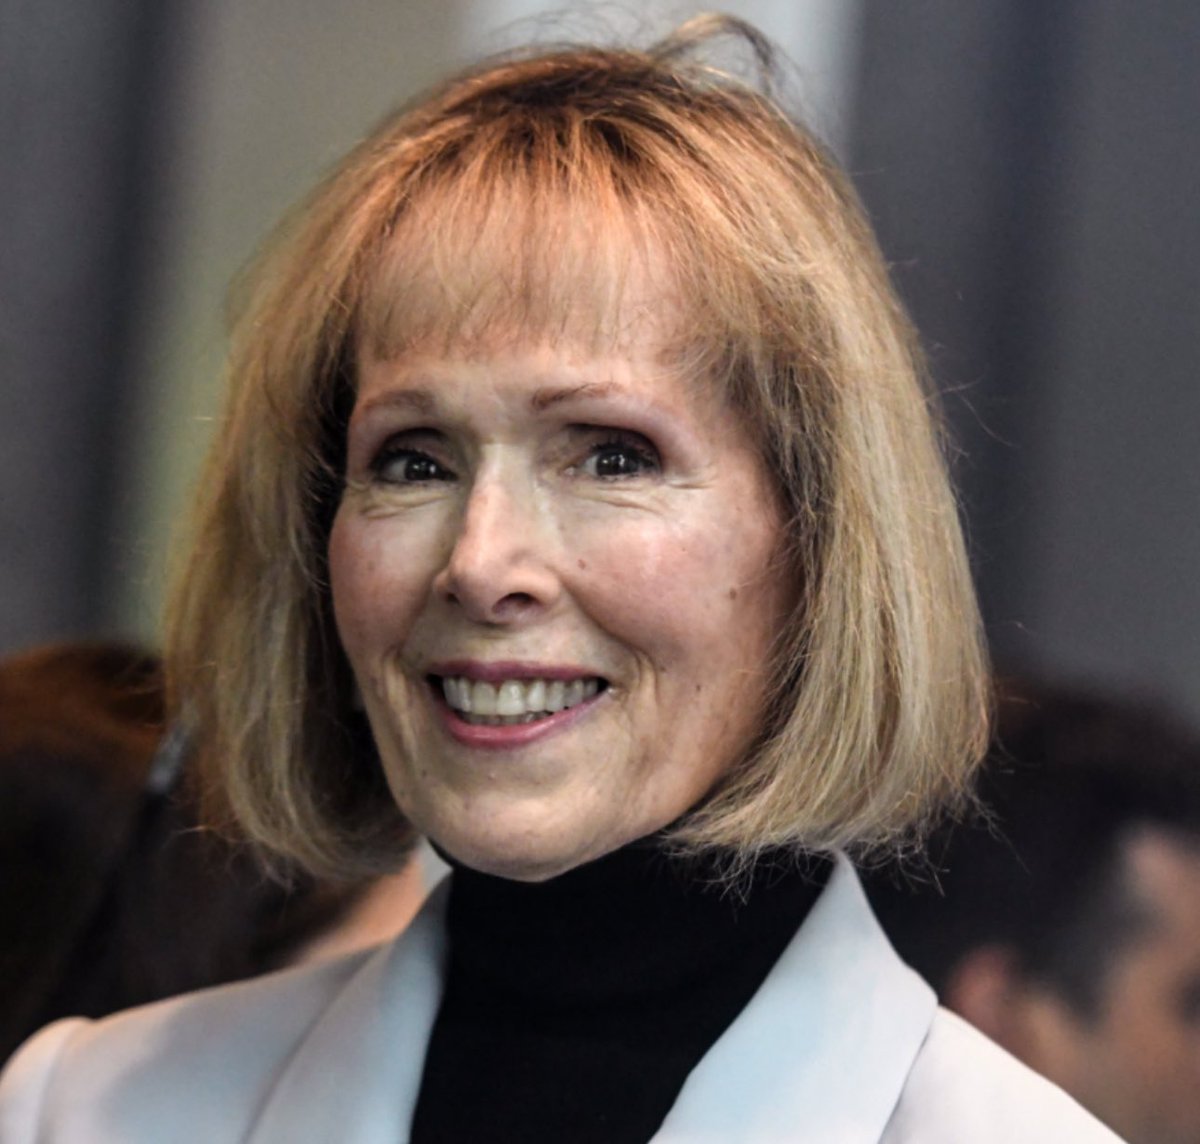 What’s the first word you think of when you see E. Jean Carroll?